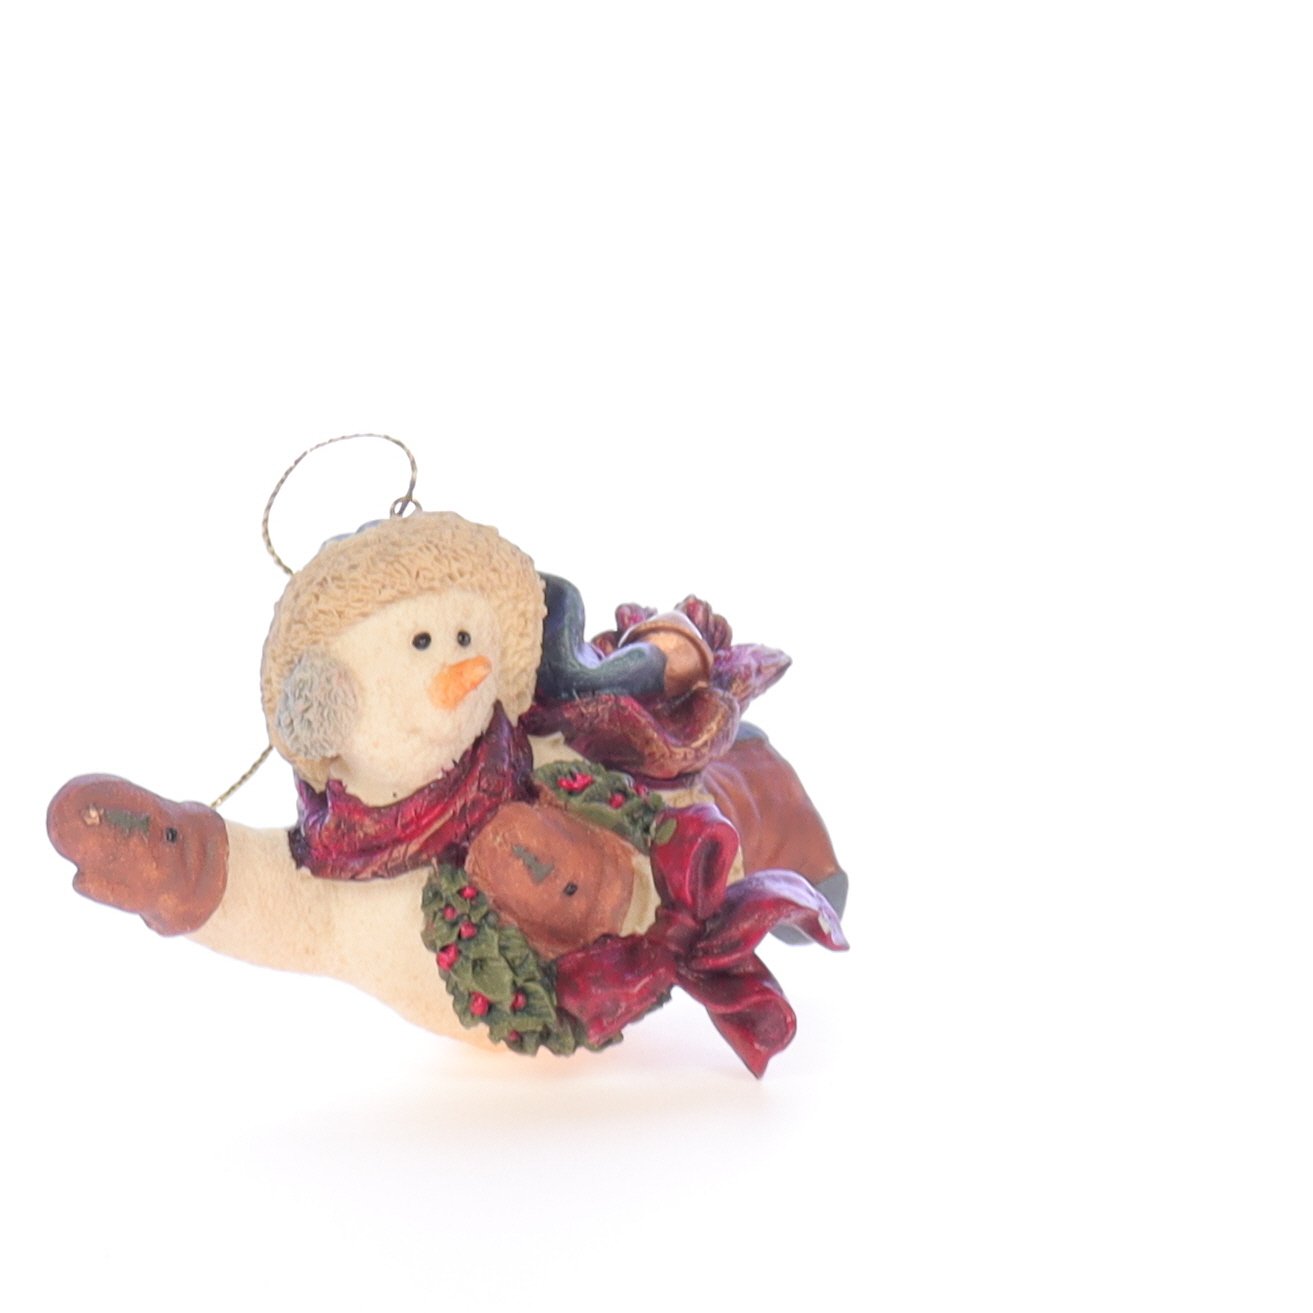 Boyds_Bears_Folkstone_Resin_Figurine_Chilly_with_Wreath_2564_08